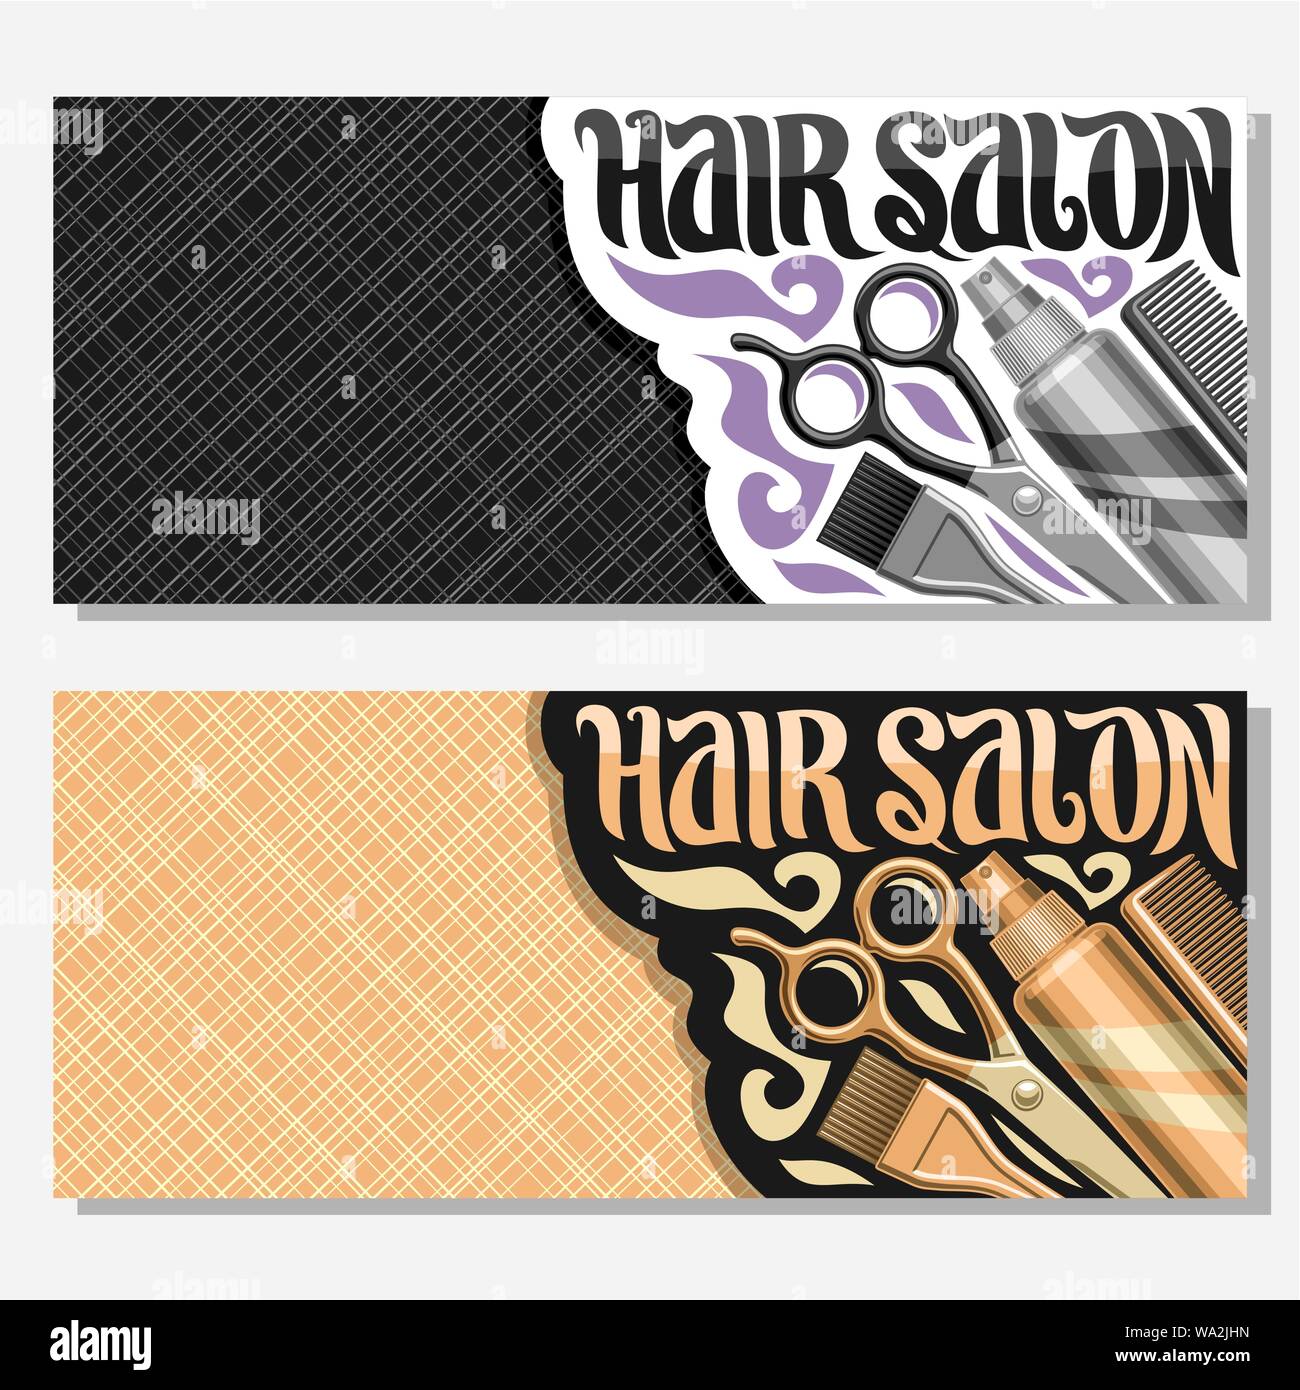 Vector banners for Hair Salon with copy space, templates with hairdresser professional equipment, original brush typeface for words hair salon, coupon Stock Vector